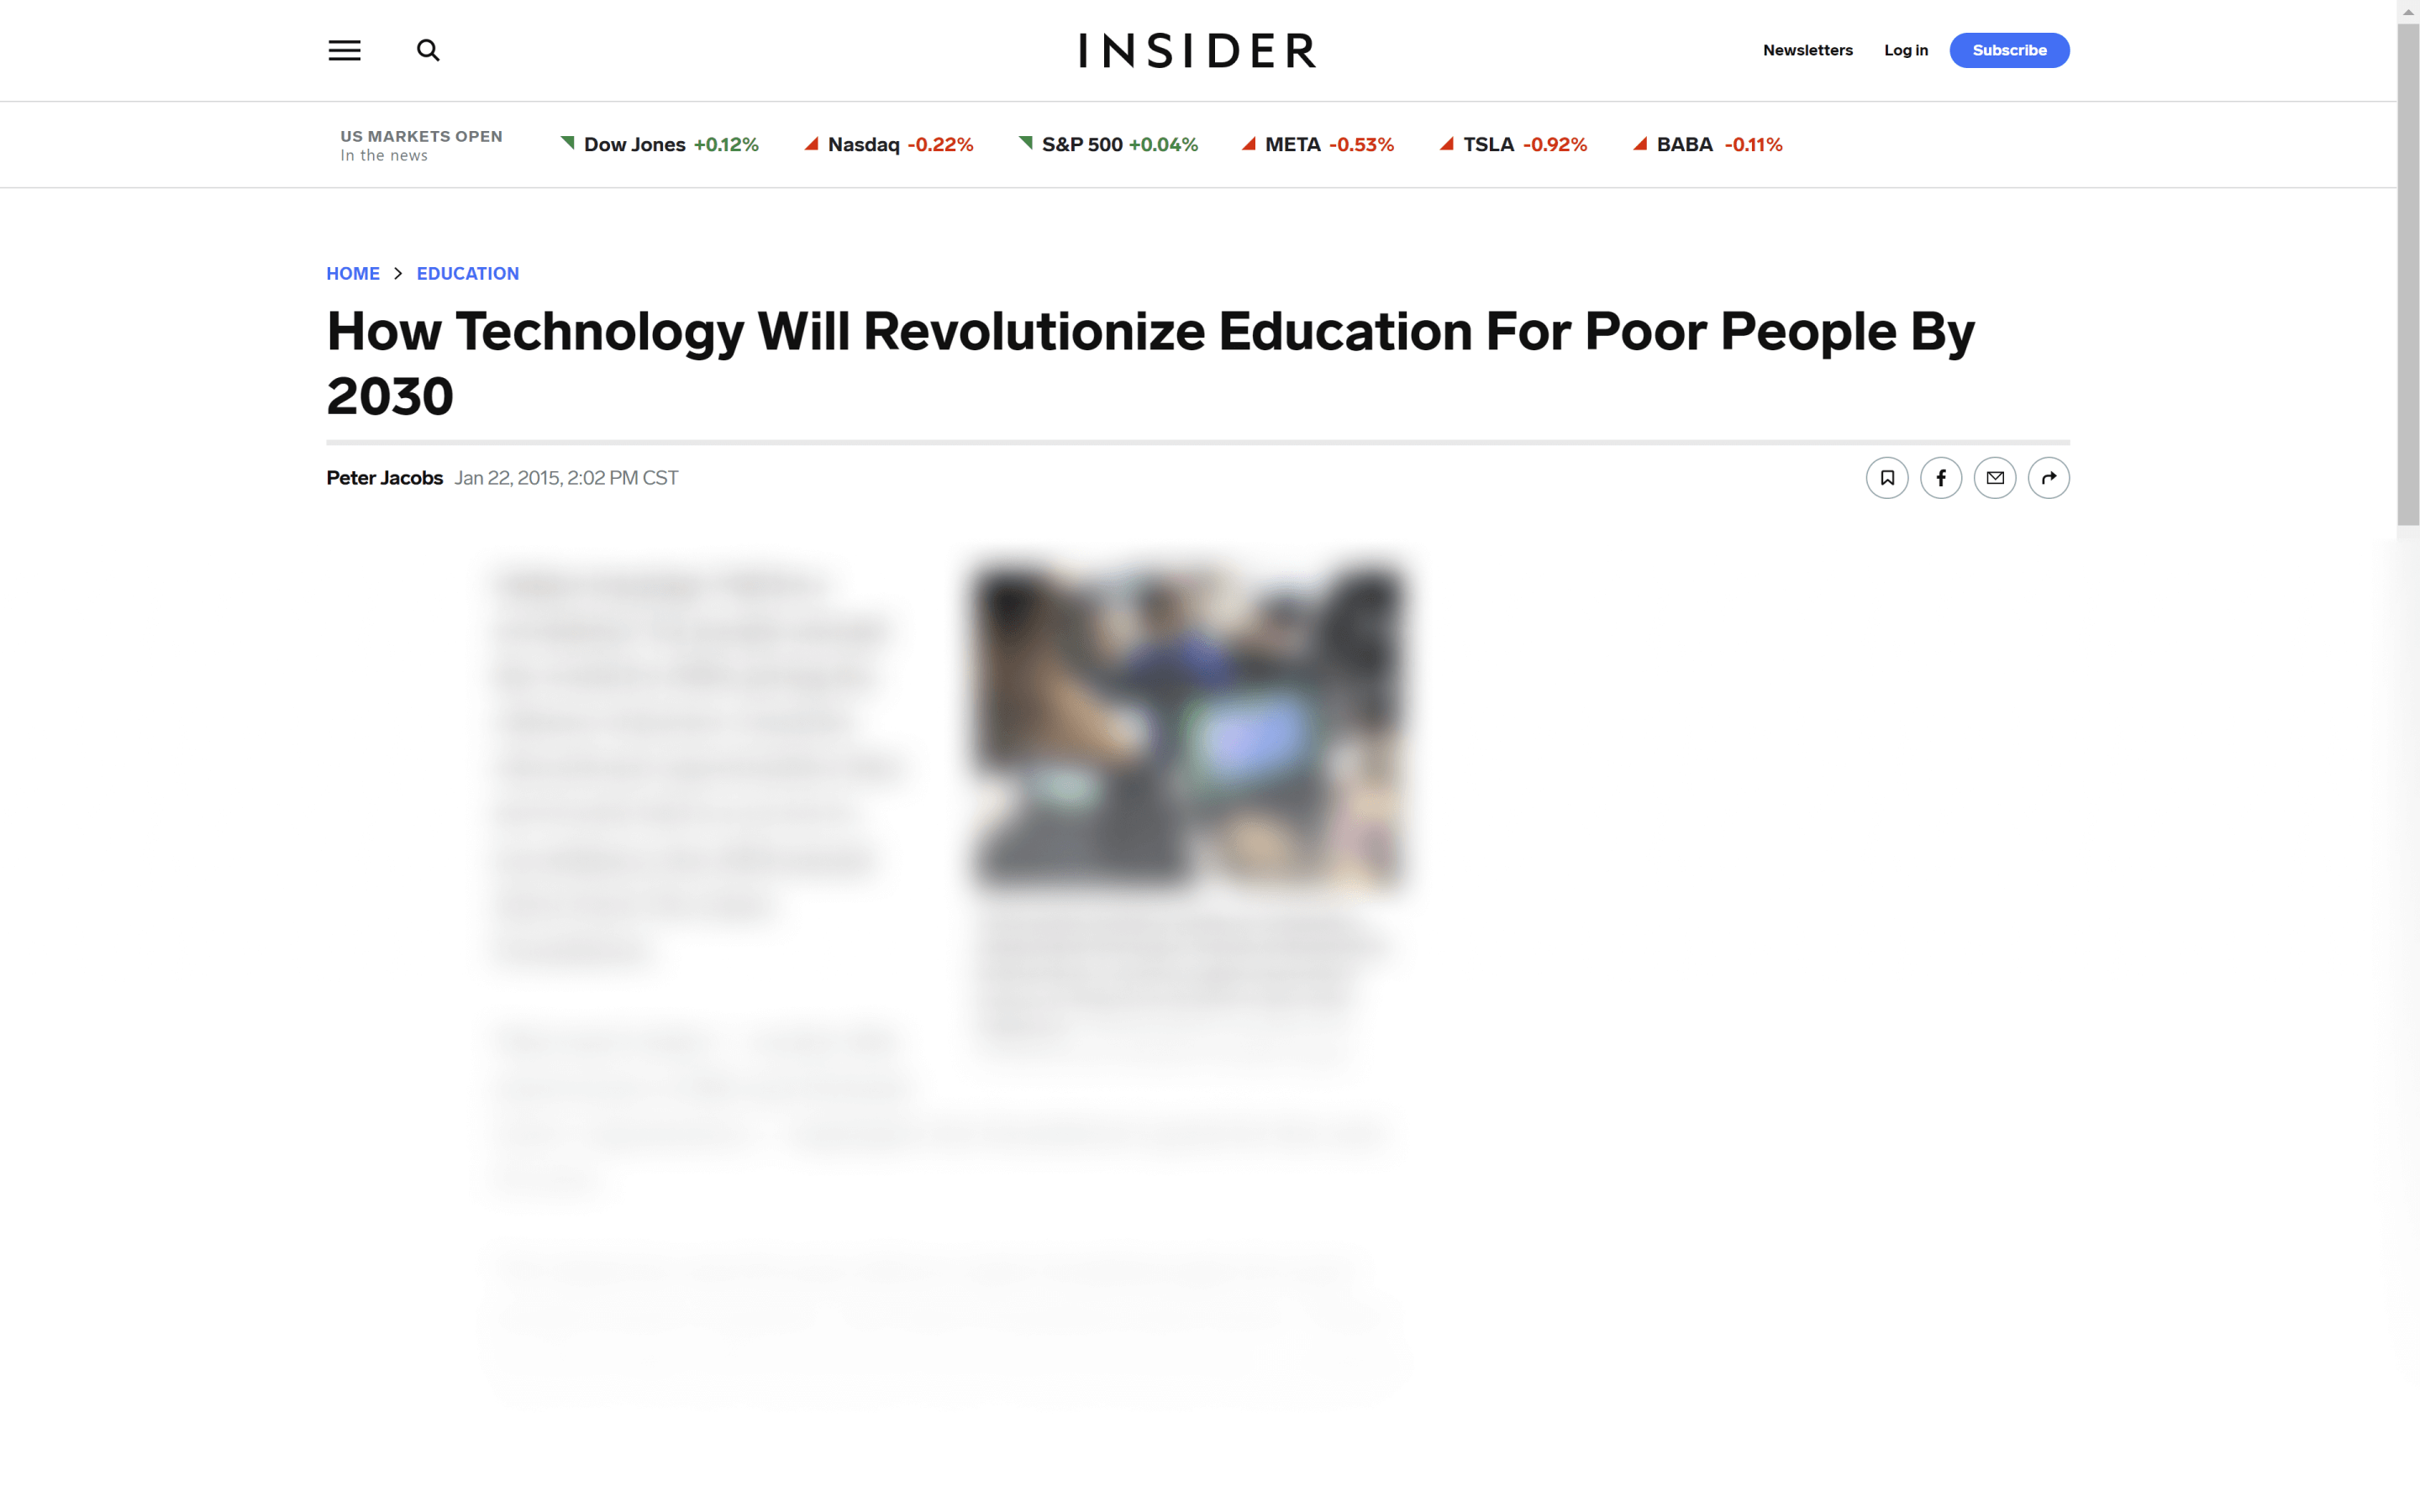 How technology will revolutionize education for poor people by 2030